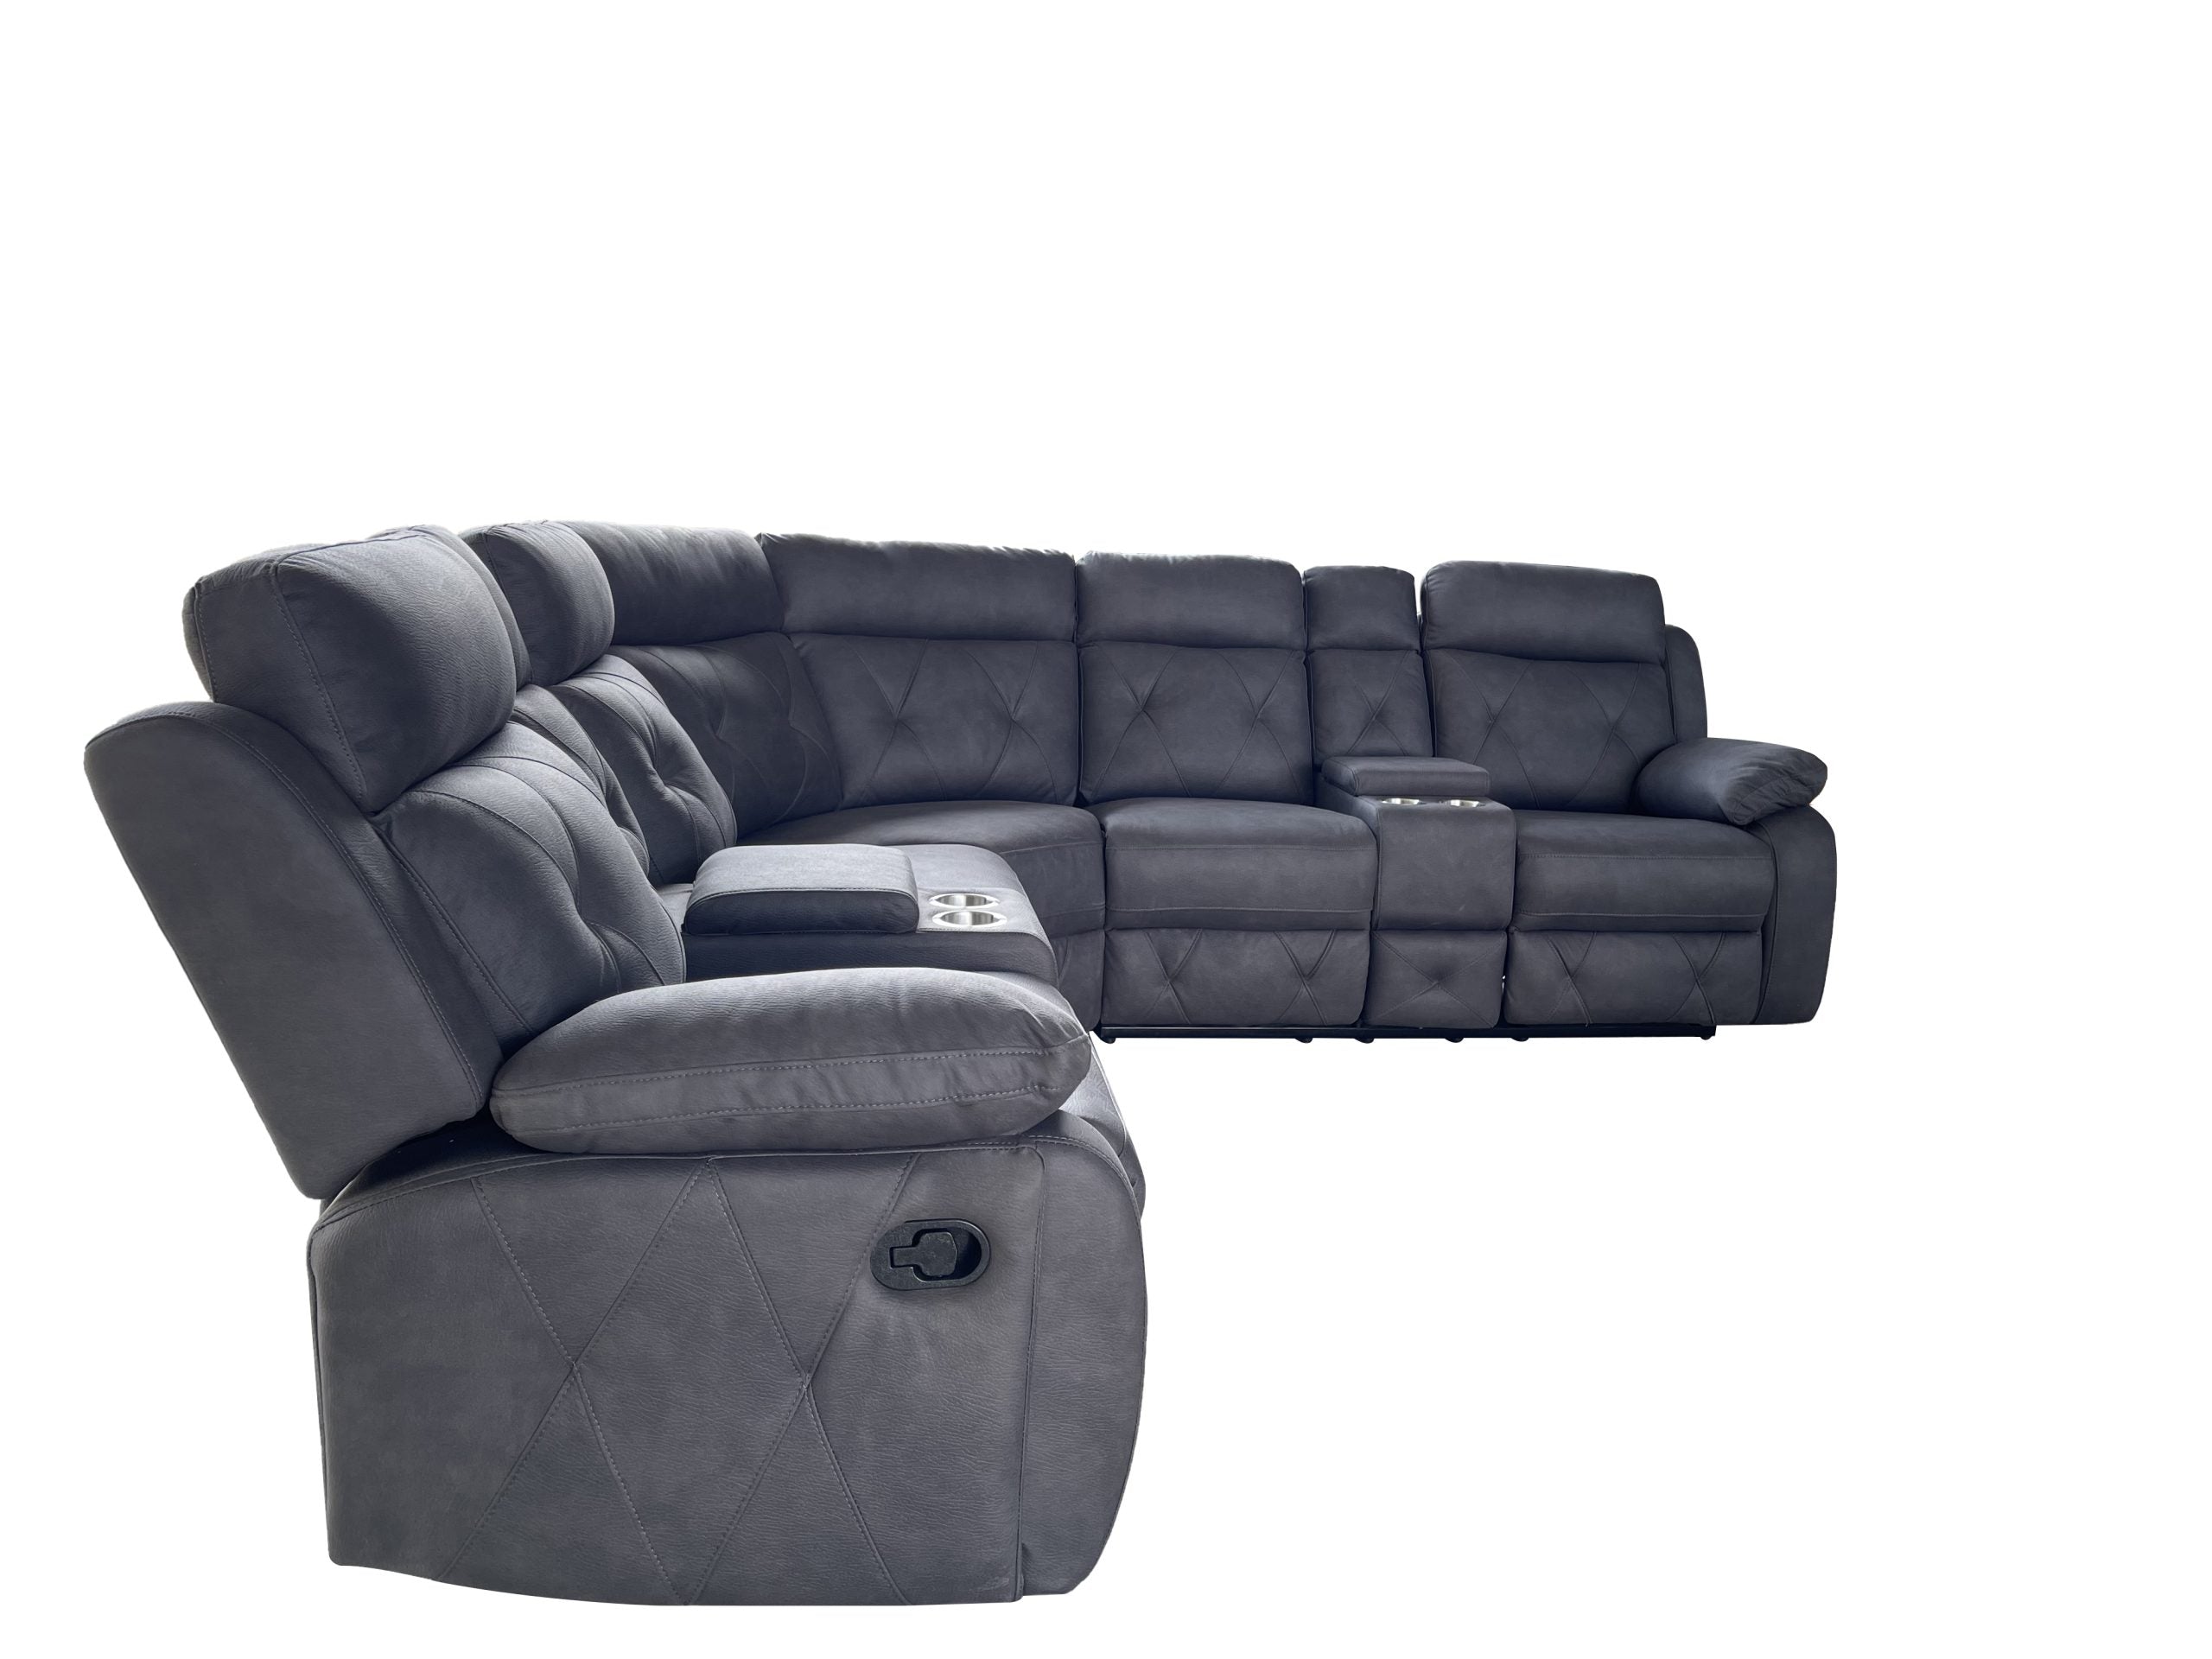 BT Oxley Fabric Upholstered 5 Seater Recliner Corner Lounge